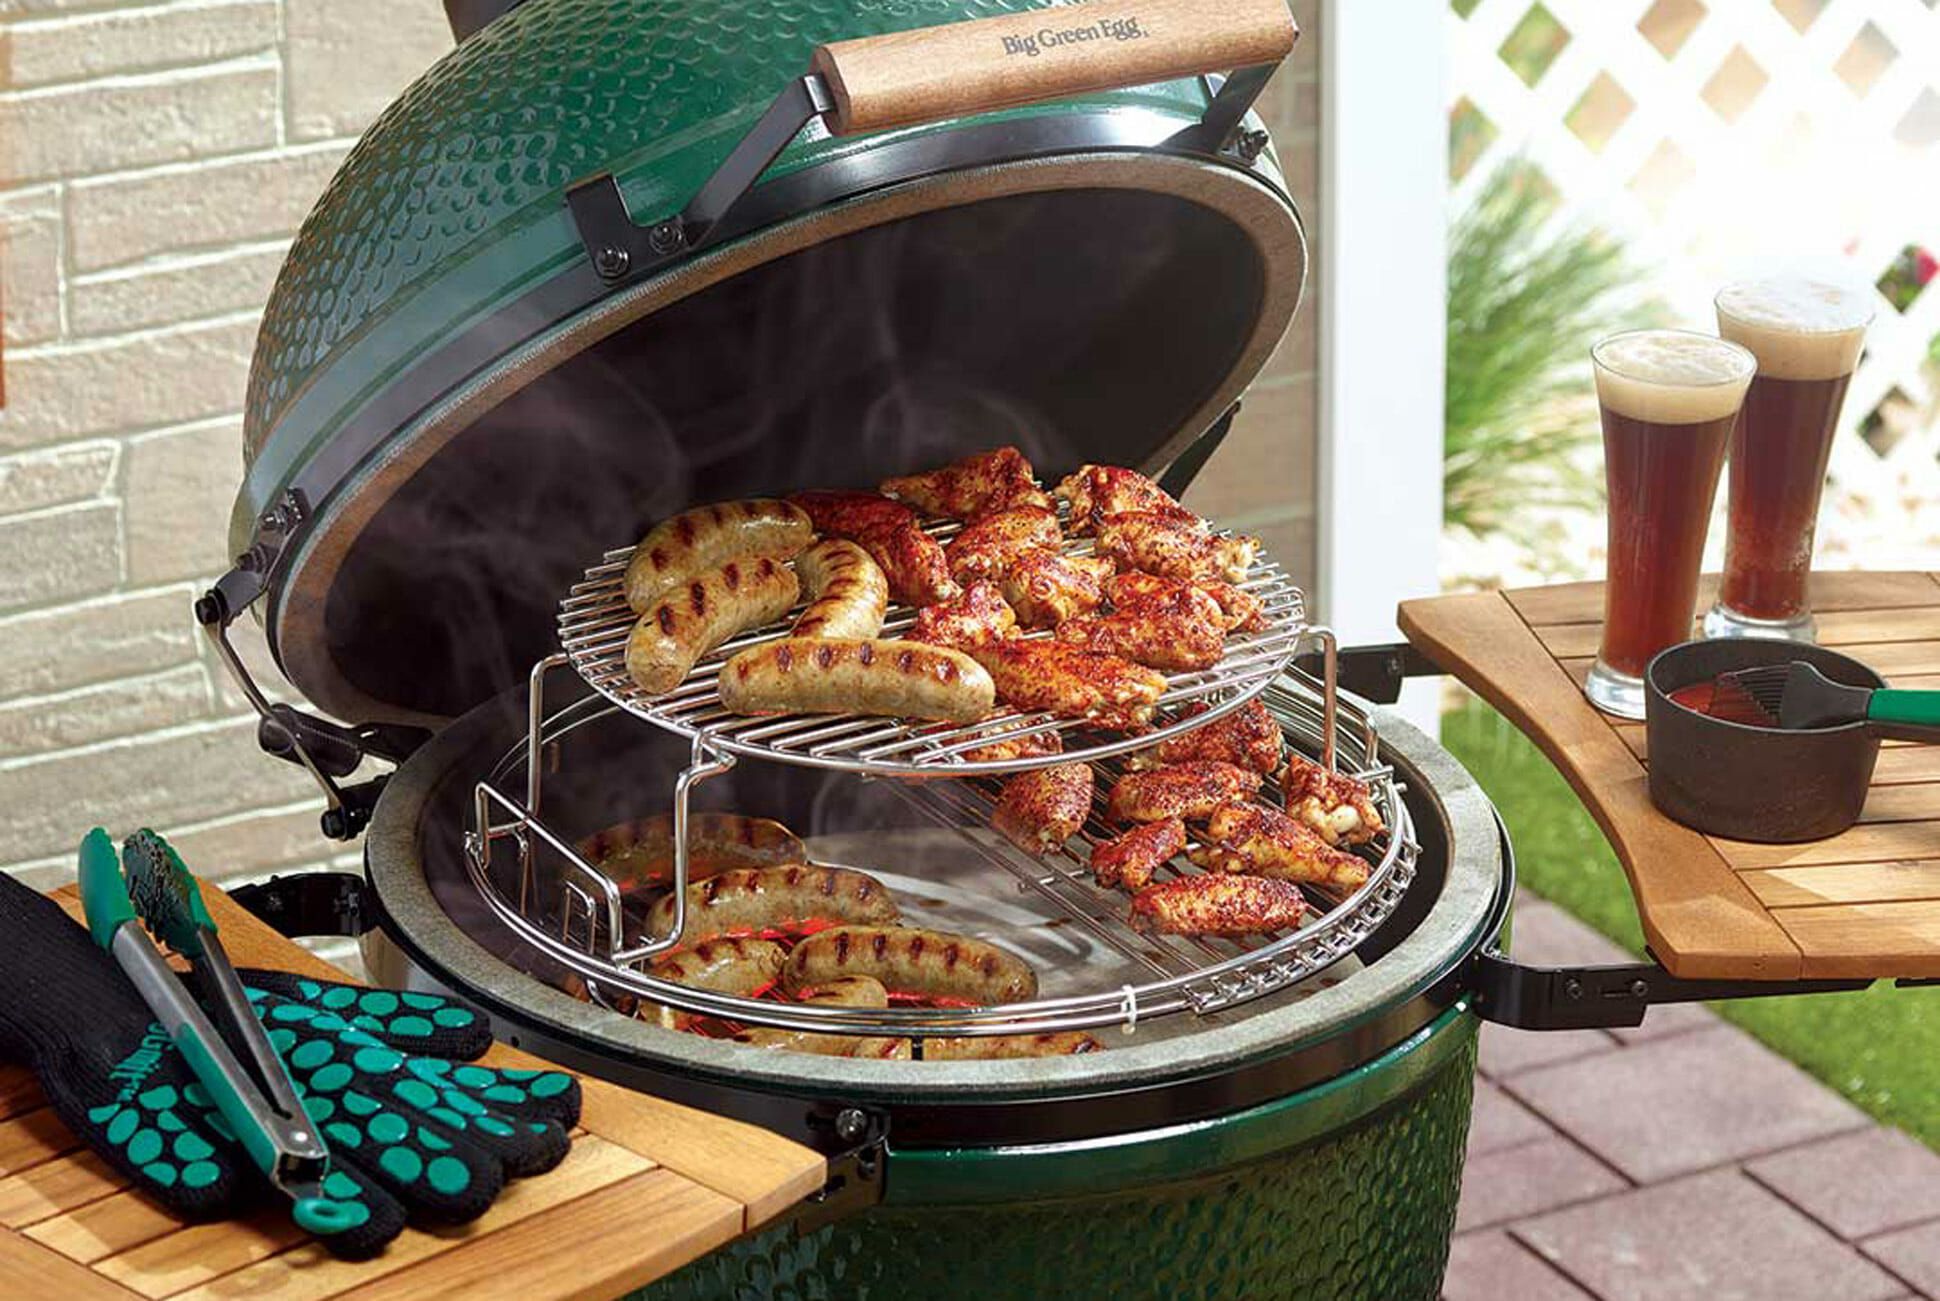 Big Egg's Mega-Popular Grills Are Available Online